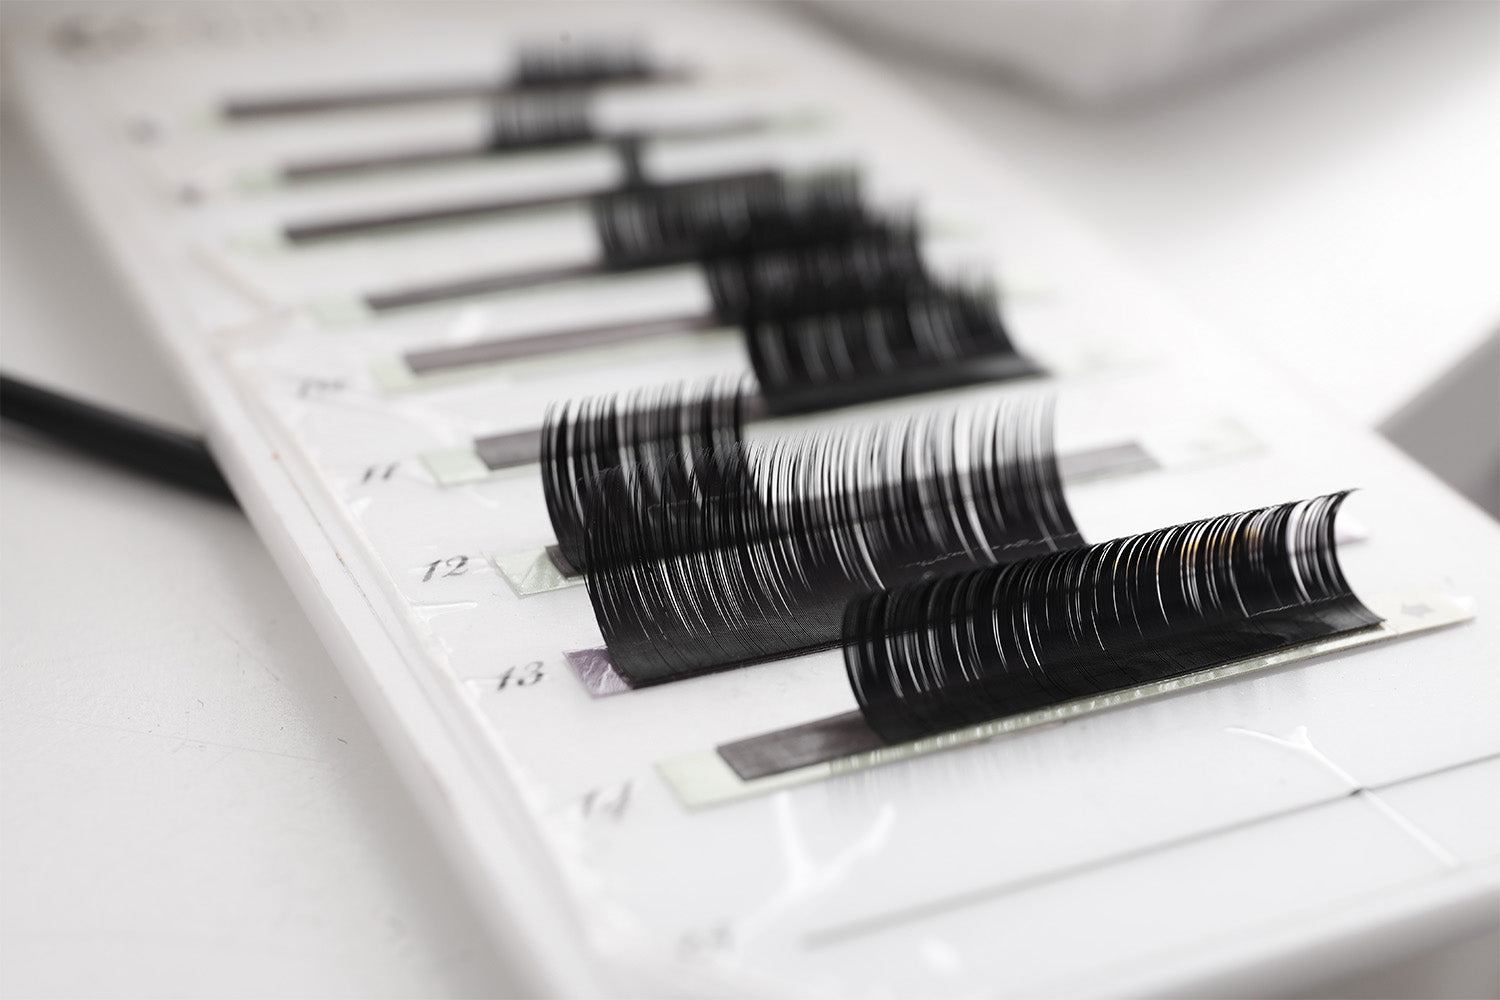 How To Clean Eyelash Extensions the Right Way